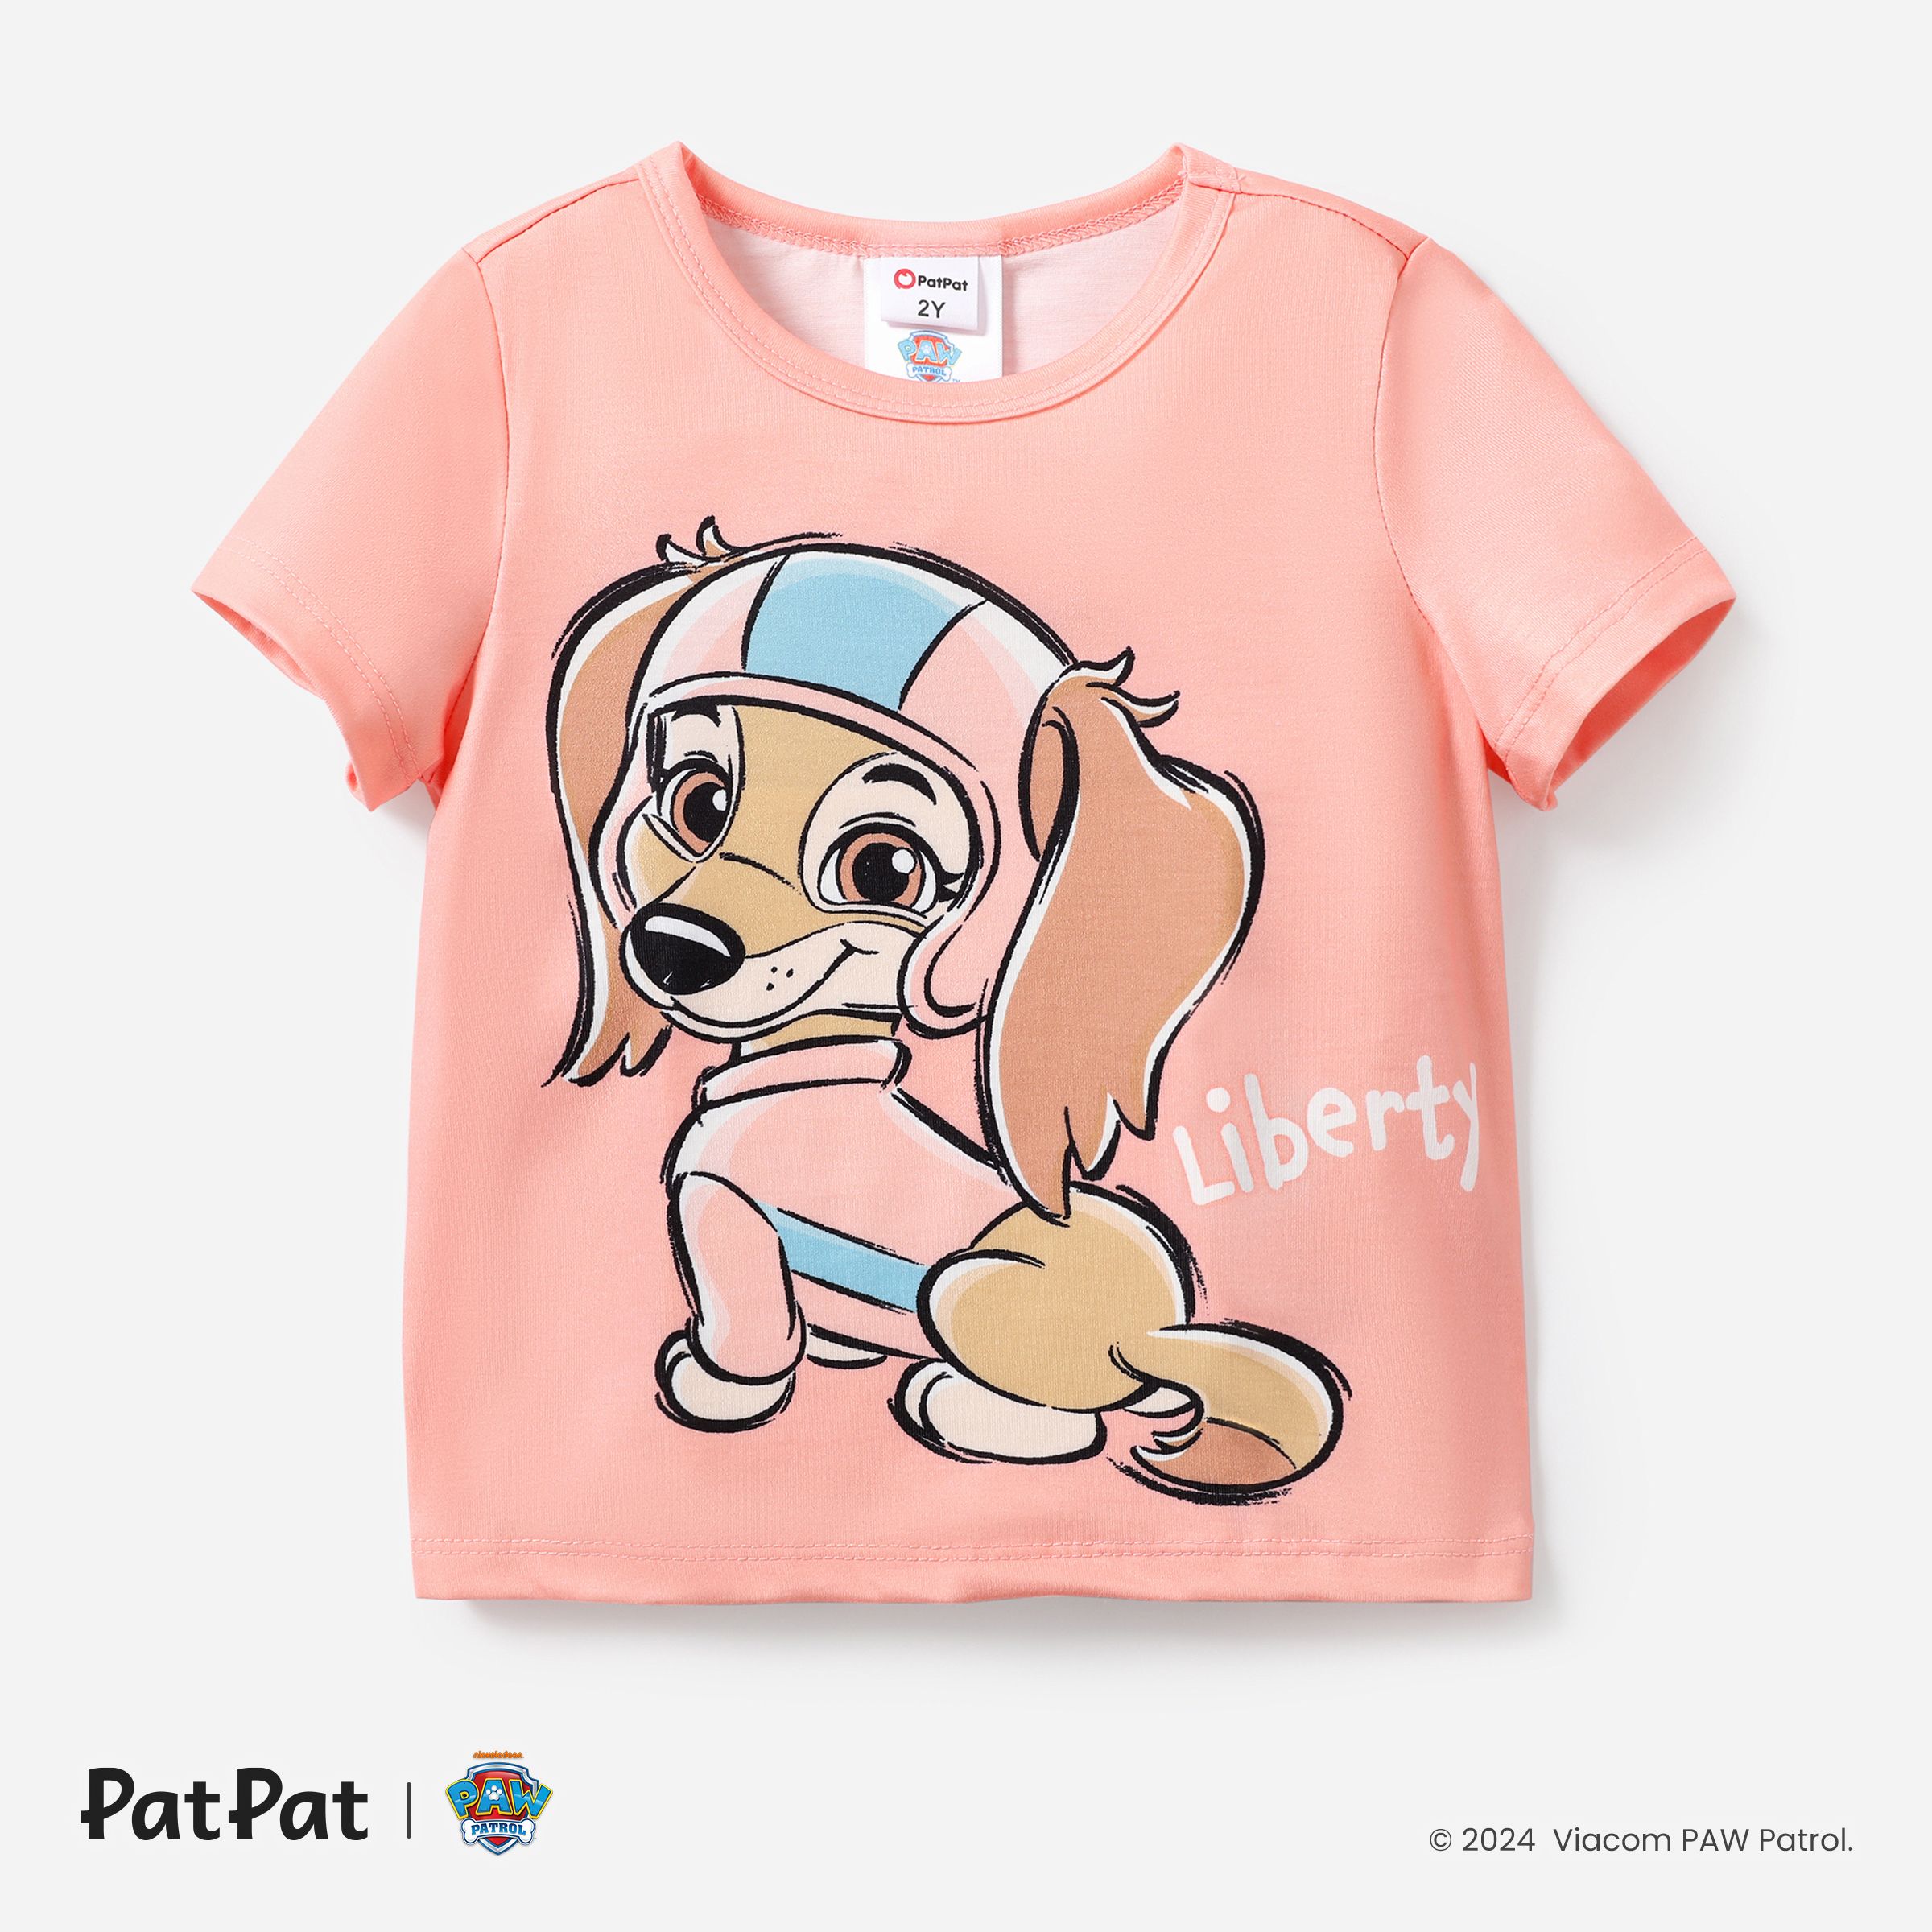 PAW Patrol Toddler Boy/Toddler Girl Positioned Printed Graphic T-shirt